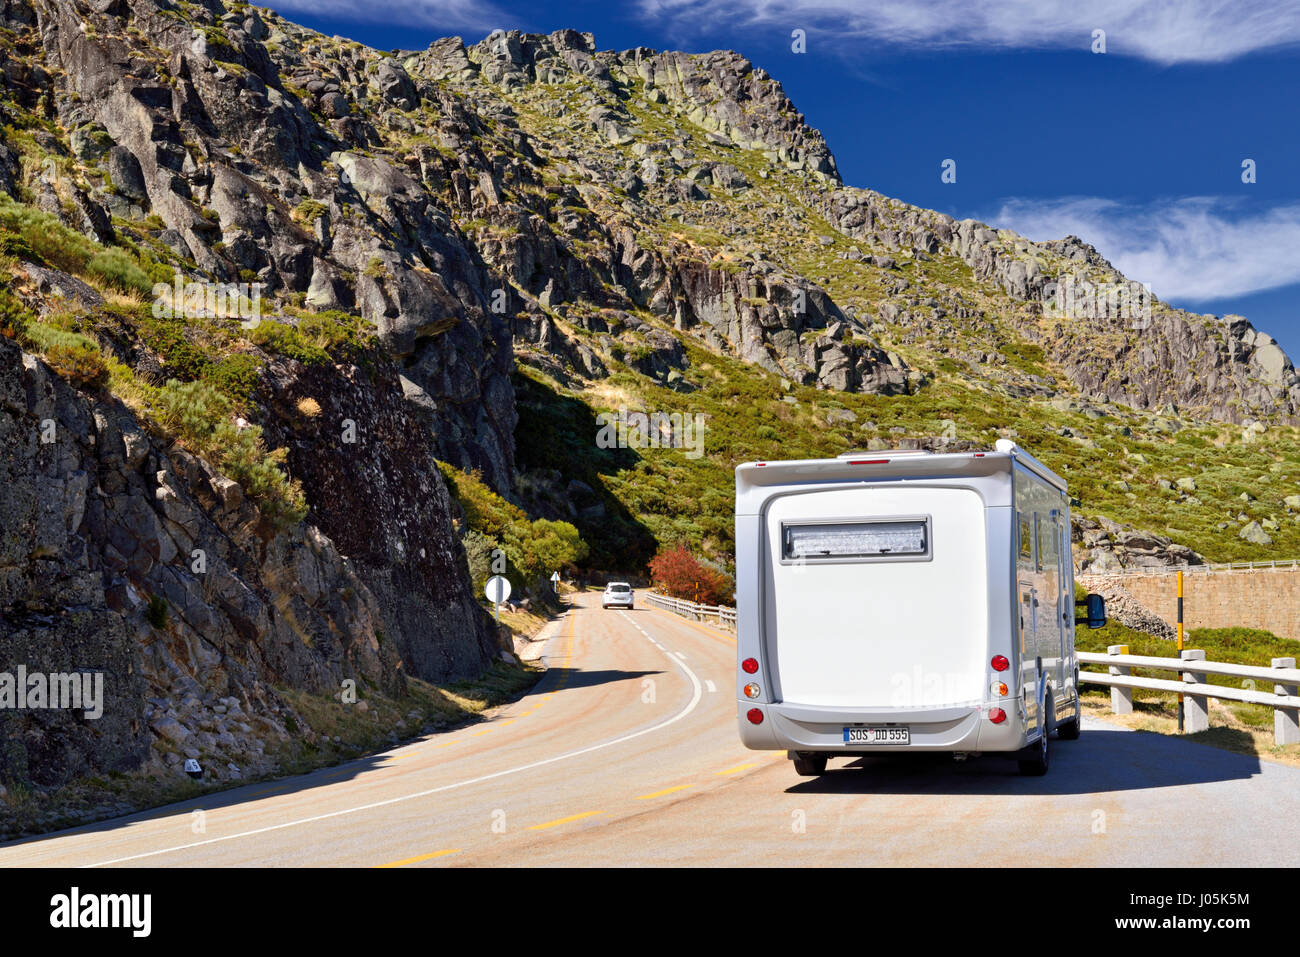 Motor home parking on a mountain road with spectacular views Stock Photo